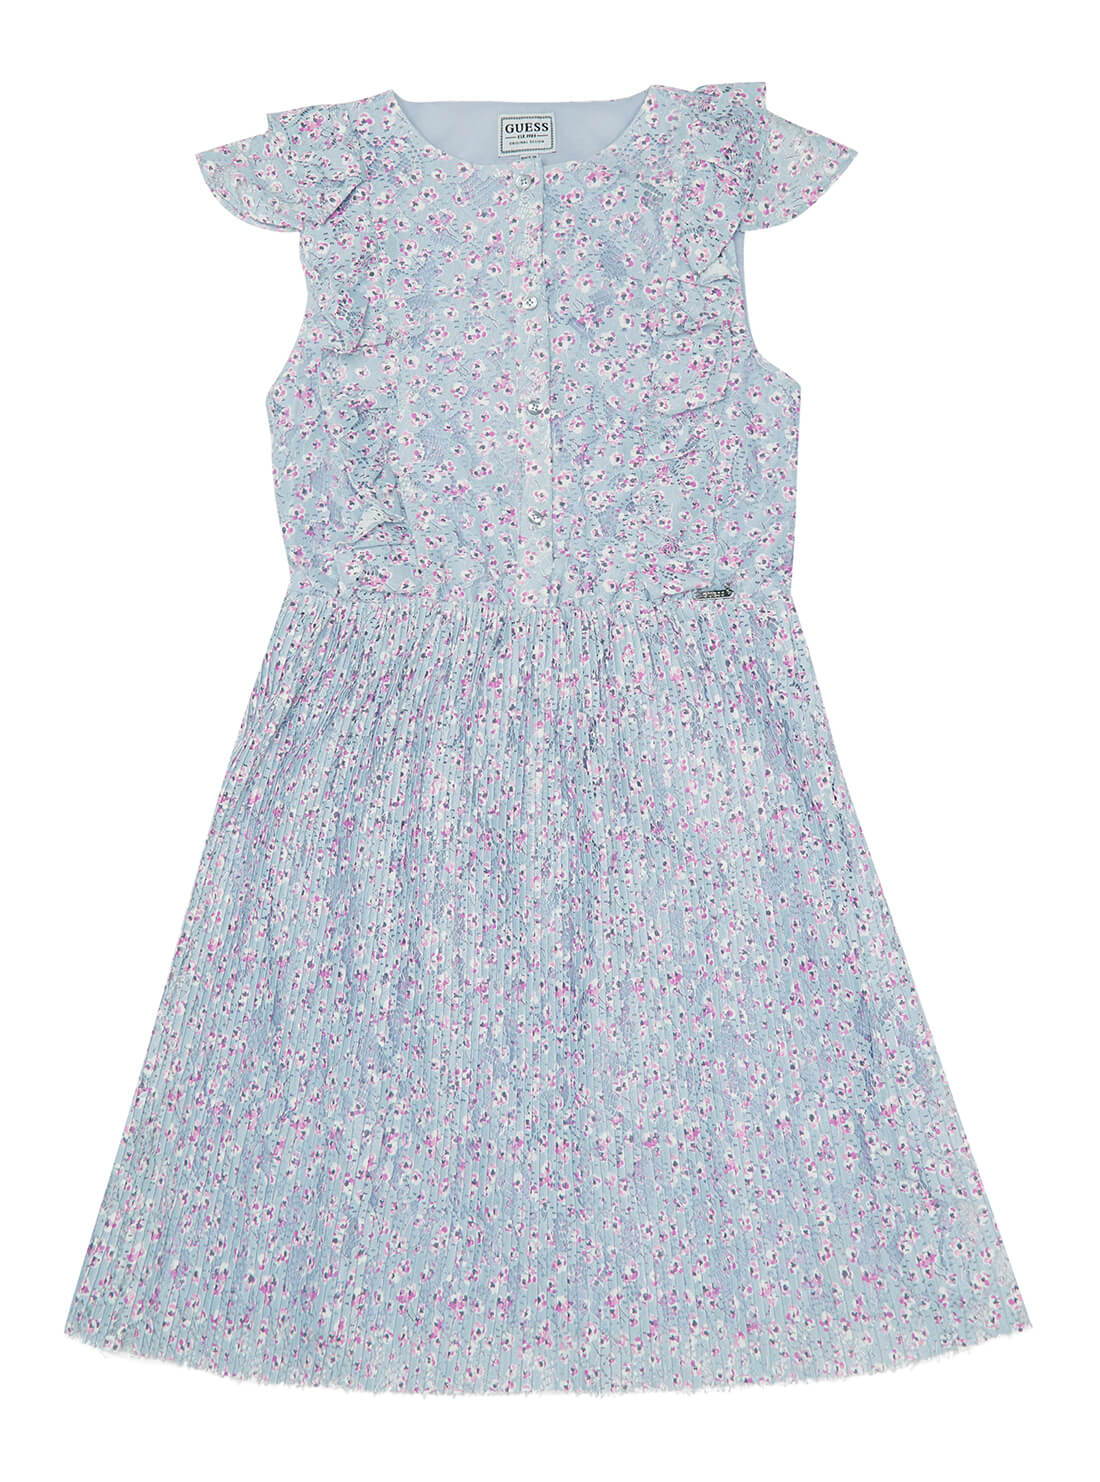 GUESS Little Girls Blue Floral Lace Dress (6-14) J2RK72WEH80 Front View